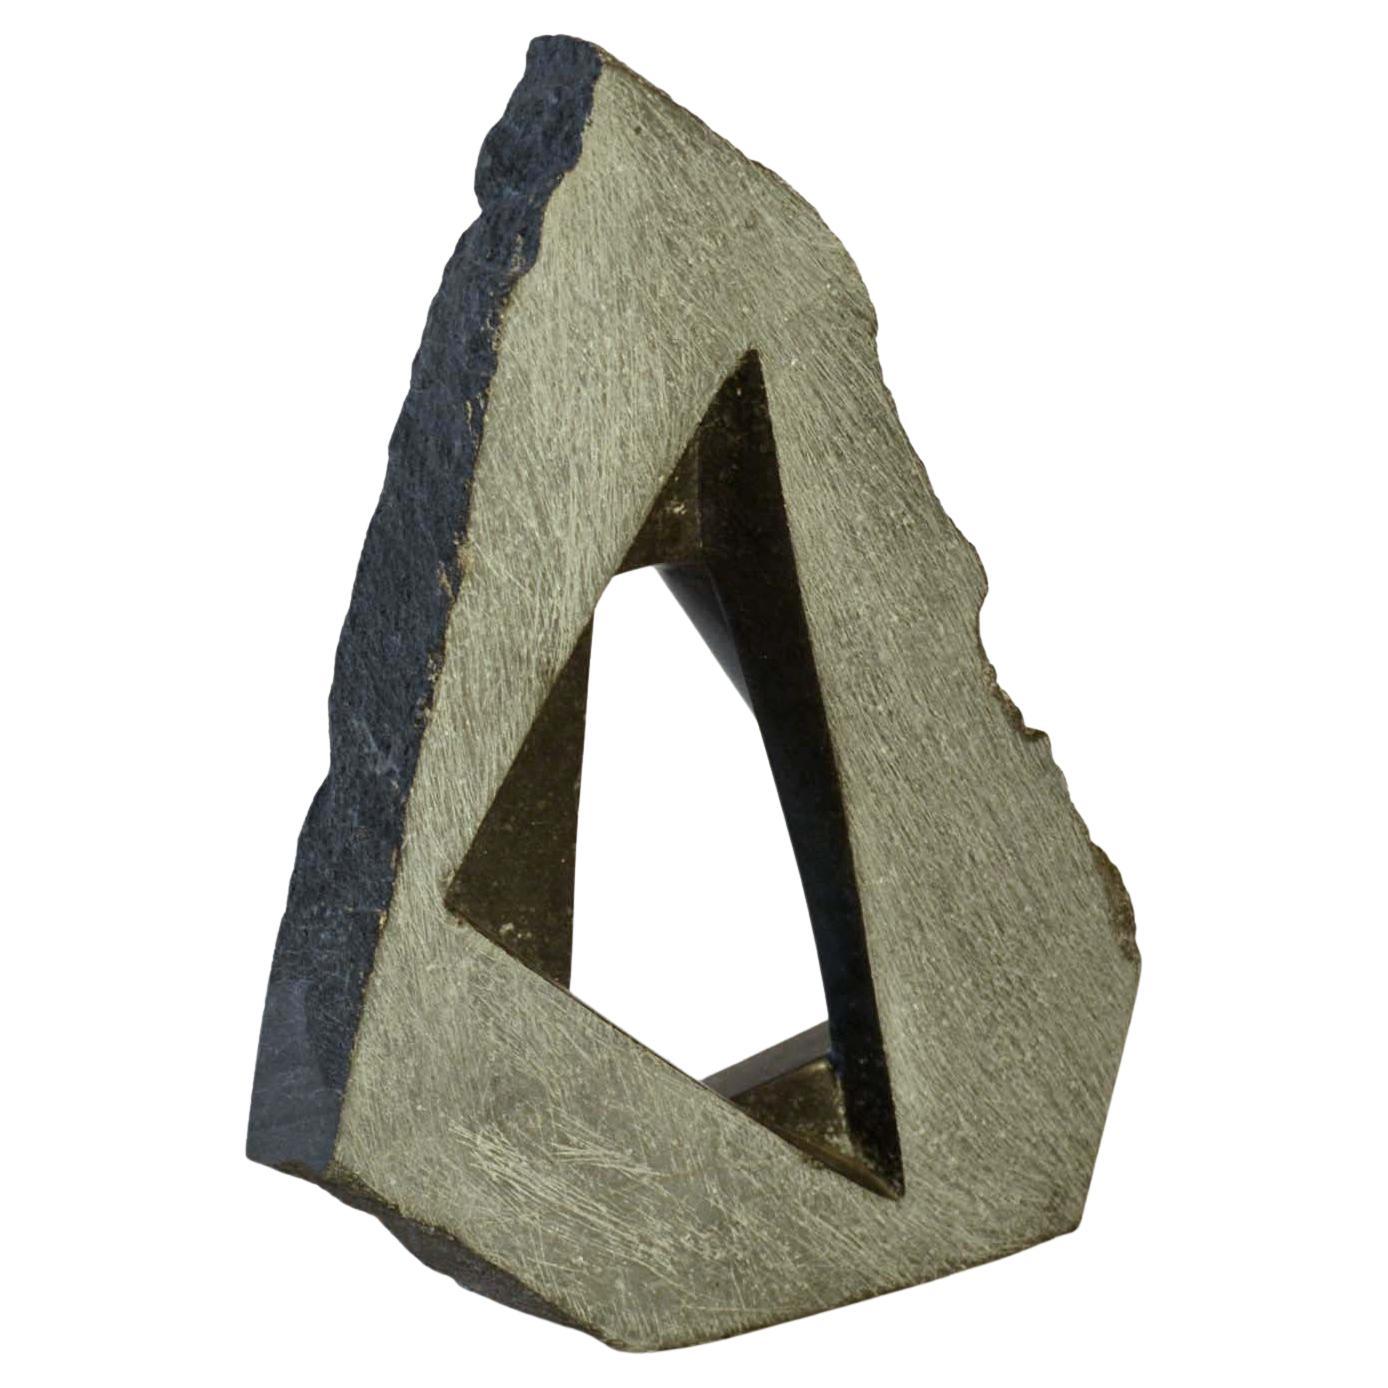 Geometric Abstract Dutch Sculpture in Black Granite For Sale